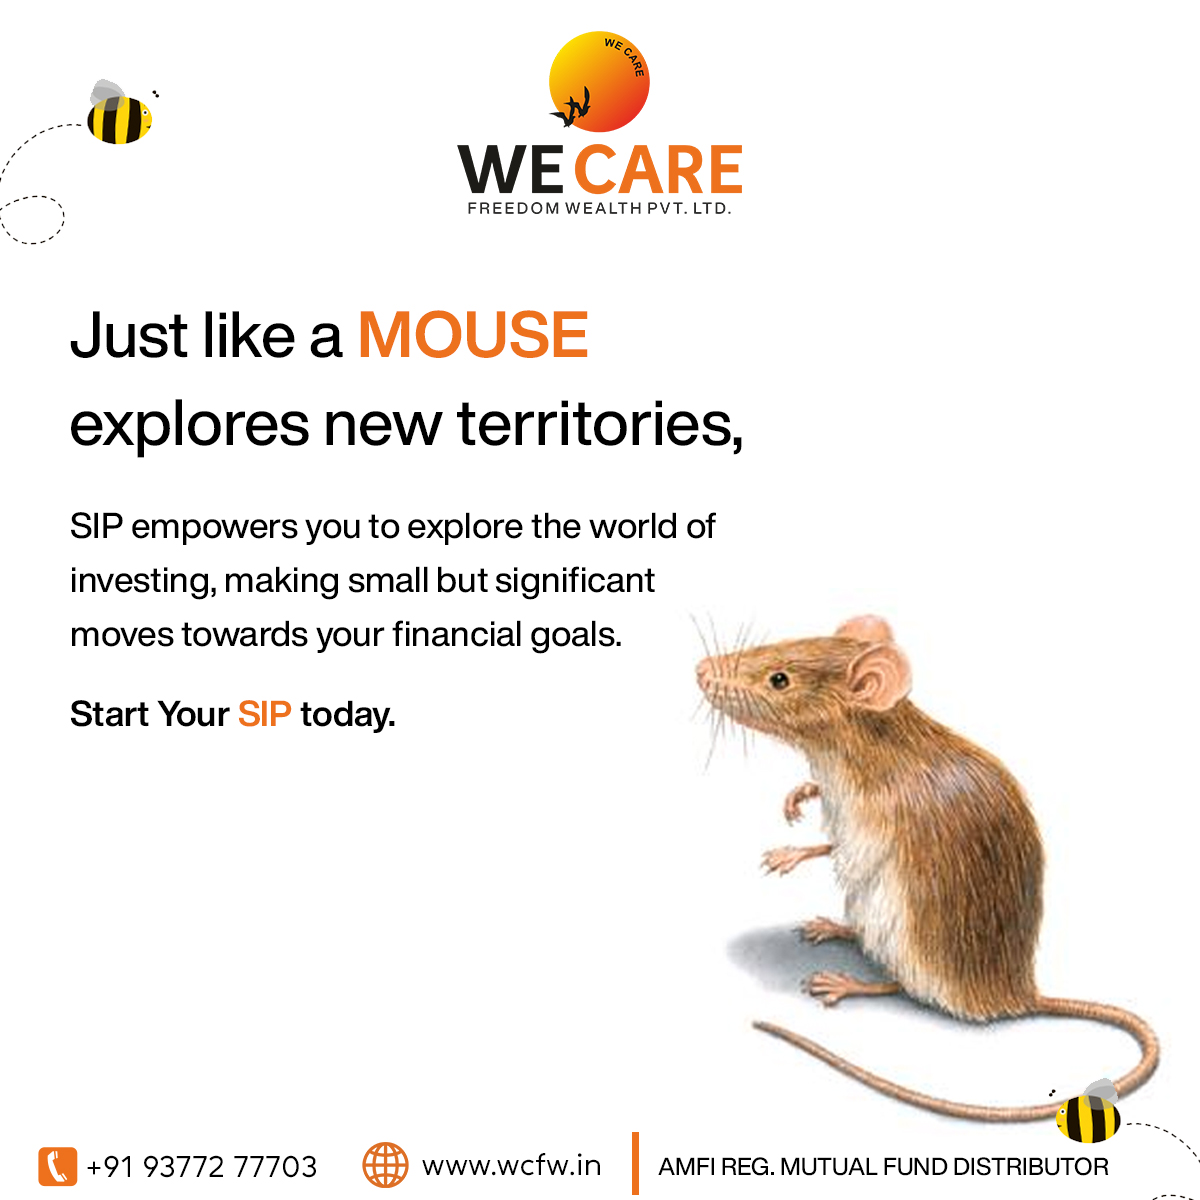 Just like a MOUSE explores new Territories,

SIP empower you to explore the world of investing, making small but Significant moves towards your Financial Goals 

Start Your SIP today.

 #SIP #Siphosaath #Sadasip #sipkaromastraho   #teamwecare #wcfw #wecarefreedomwealth